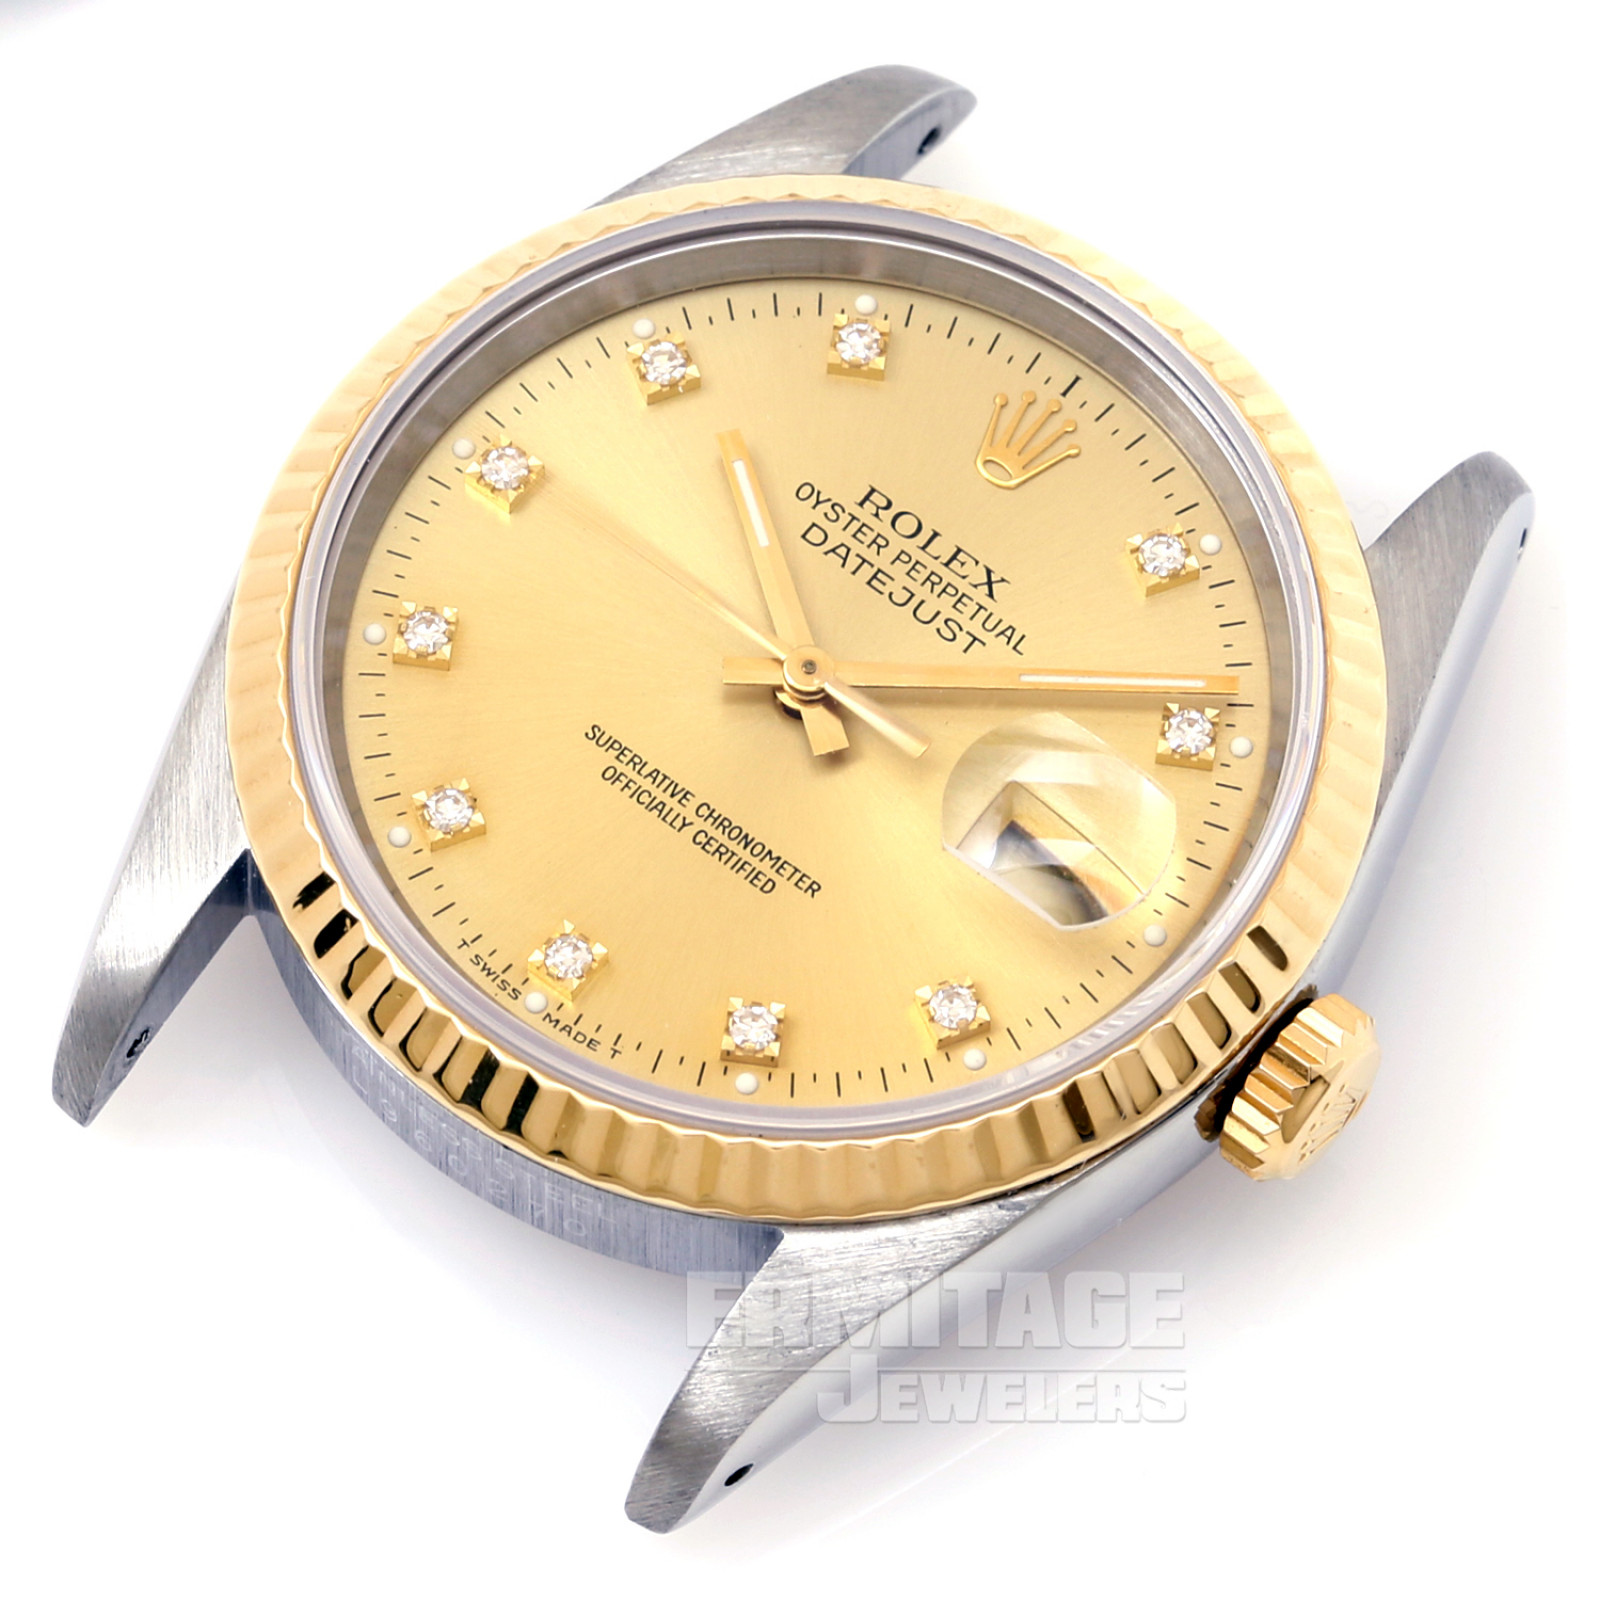 36 mm Rolex Datejust 16233 Gold & Steel on Oyster with Champagne Dial